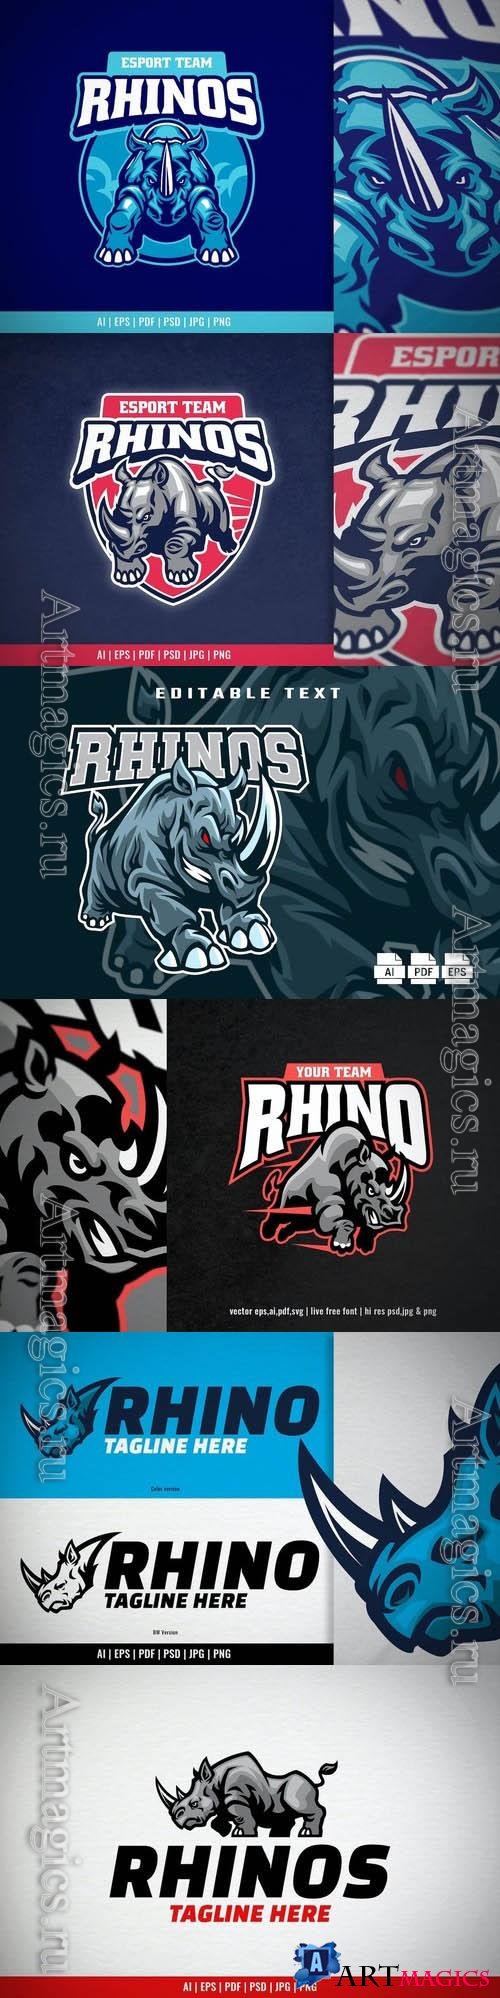 Rhino Stance for Tough and Power Logo Concept